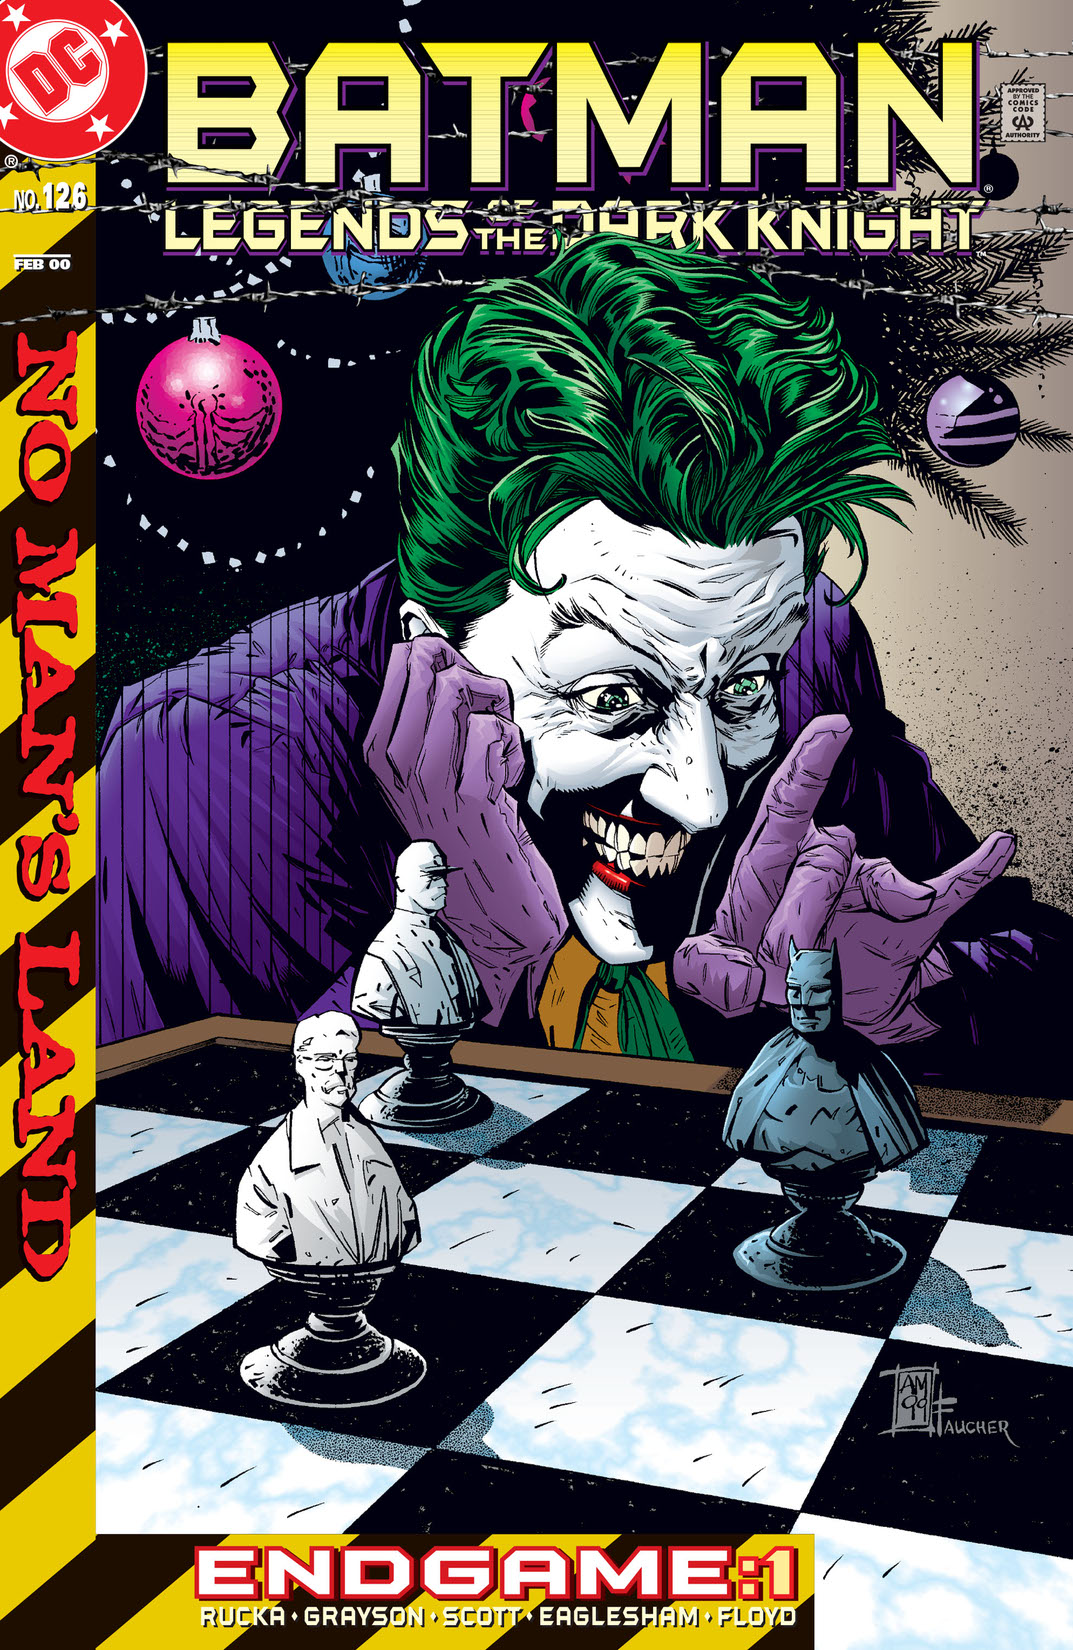 Batman: Legends of the Dark Knight #126 preview images